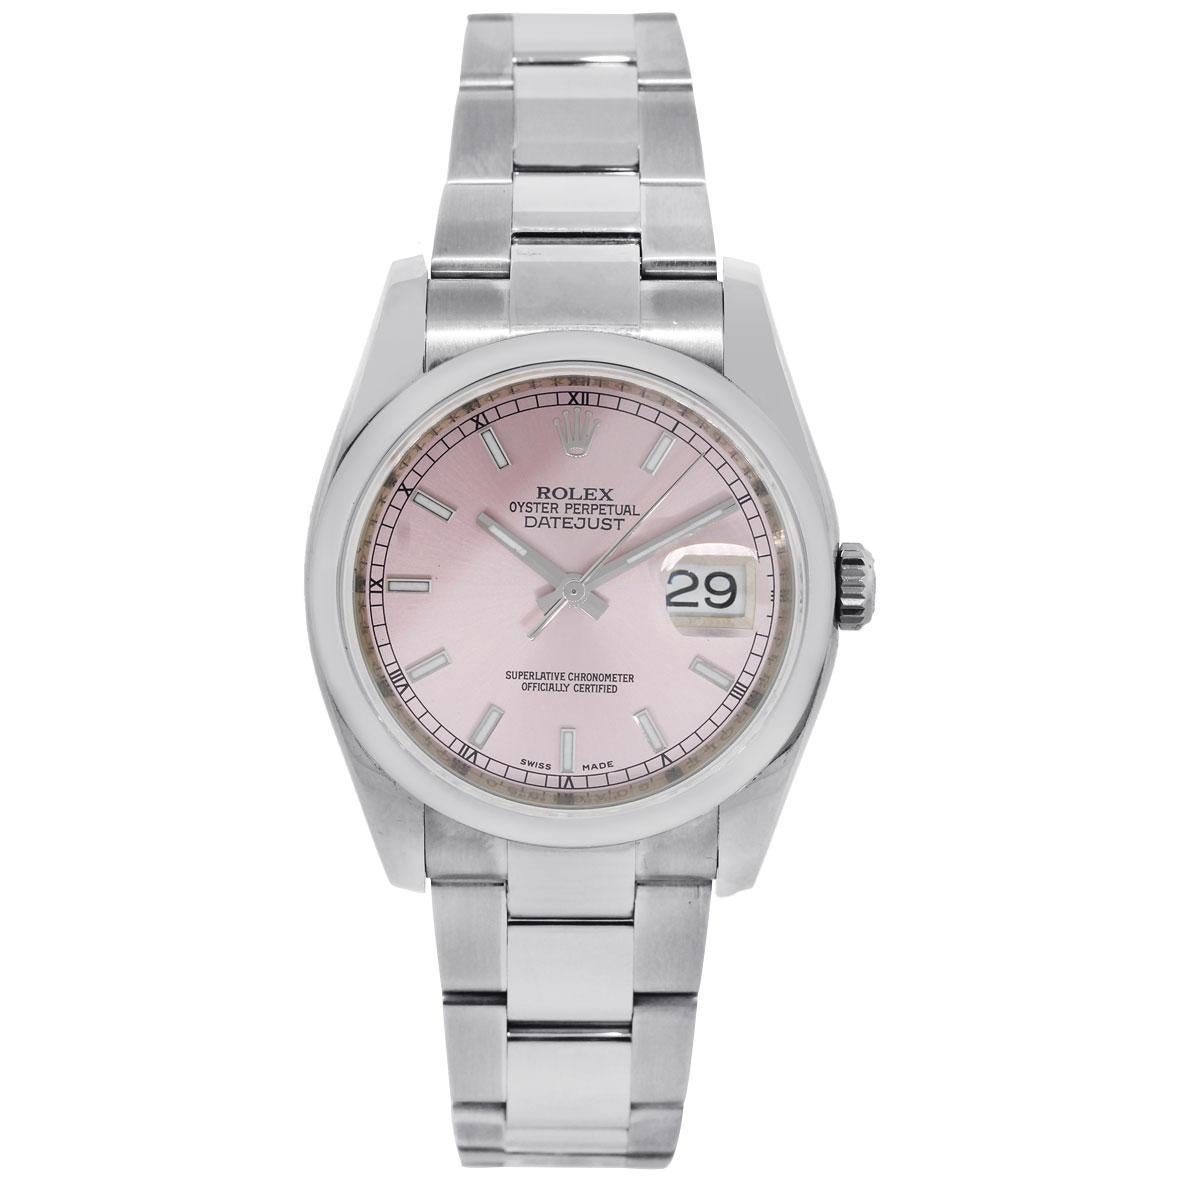 Brand: Rolex
MPN: 116200
Model: Datejust
Case Material: Stainless Steel
Case Diameter: 36mm
Bezel: Stainless Steel smooth bezel
Dial: Pink dial with silver hands and hour markers. Date window is displayed at the 3 o’clock position.
Bracelet: